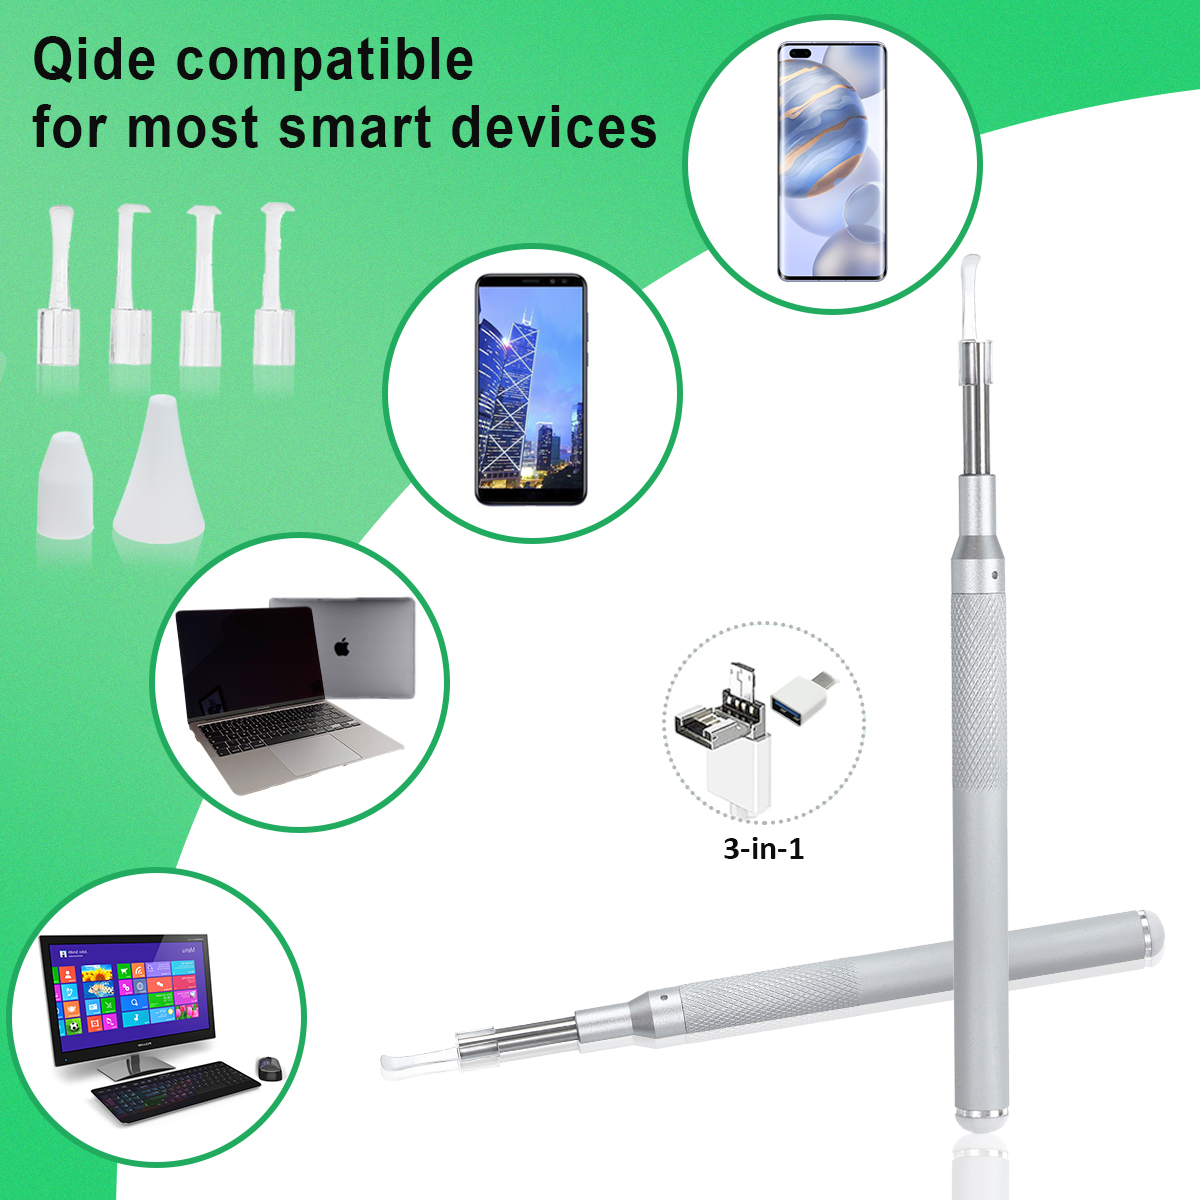 39mm-Visual-Thin-Lens-HD-Ear-Endoscopes-with-Earwax-6-Adjustable-LED-Lights-Ear-Cleaning-Tool-1737017-1